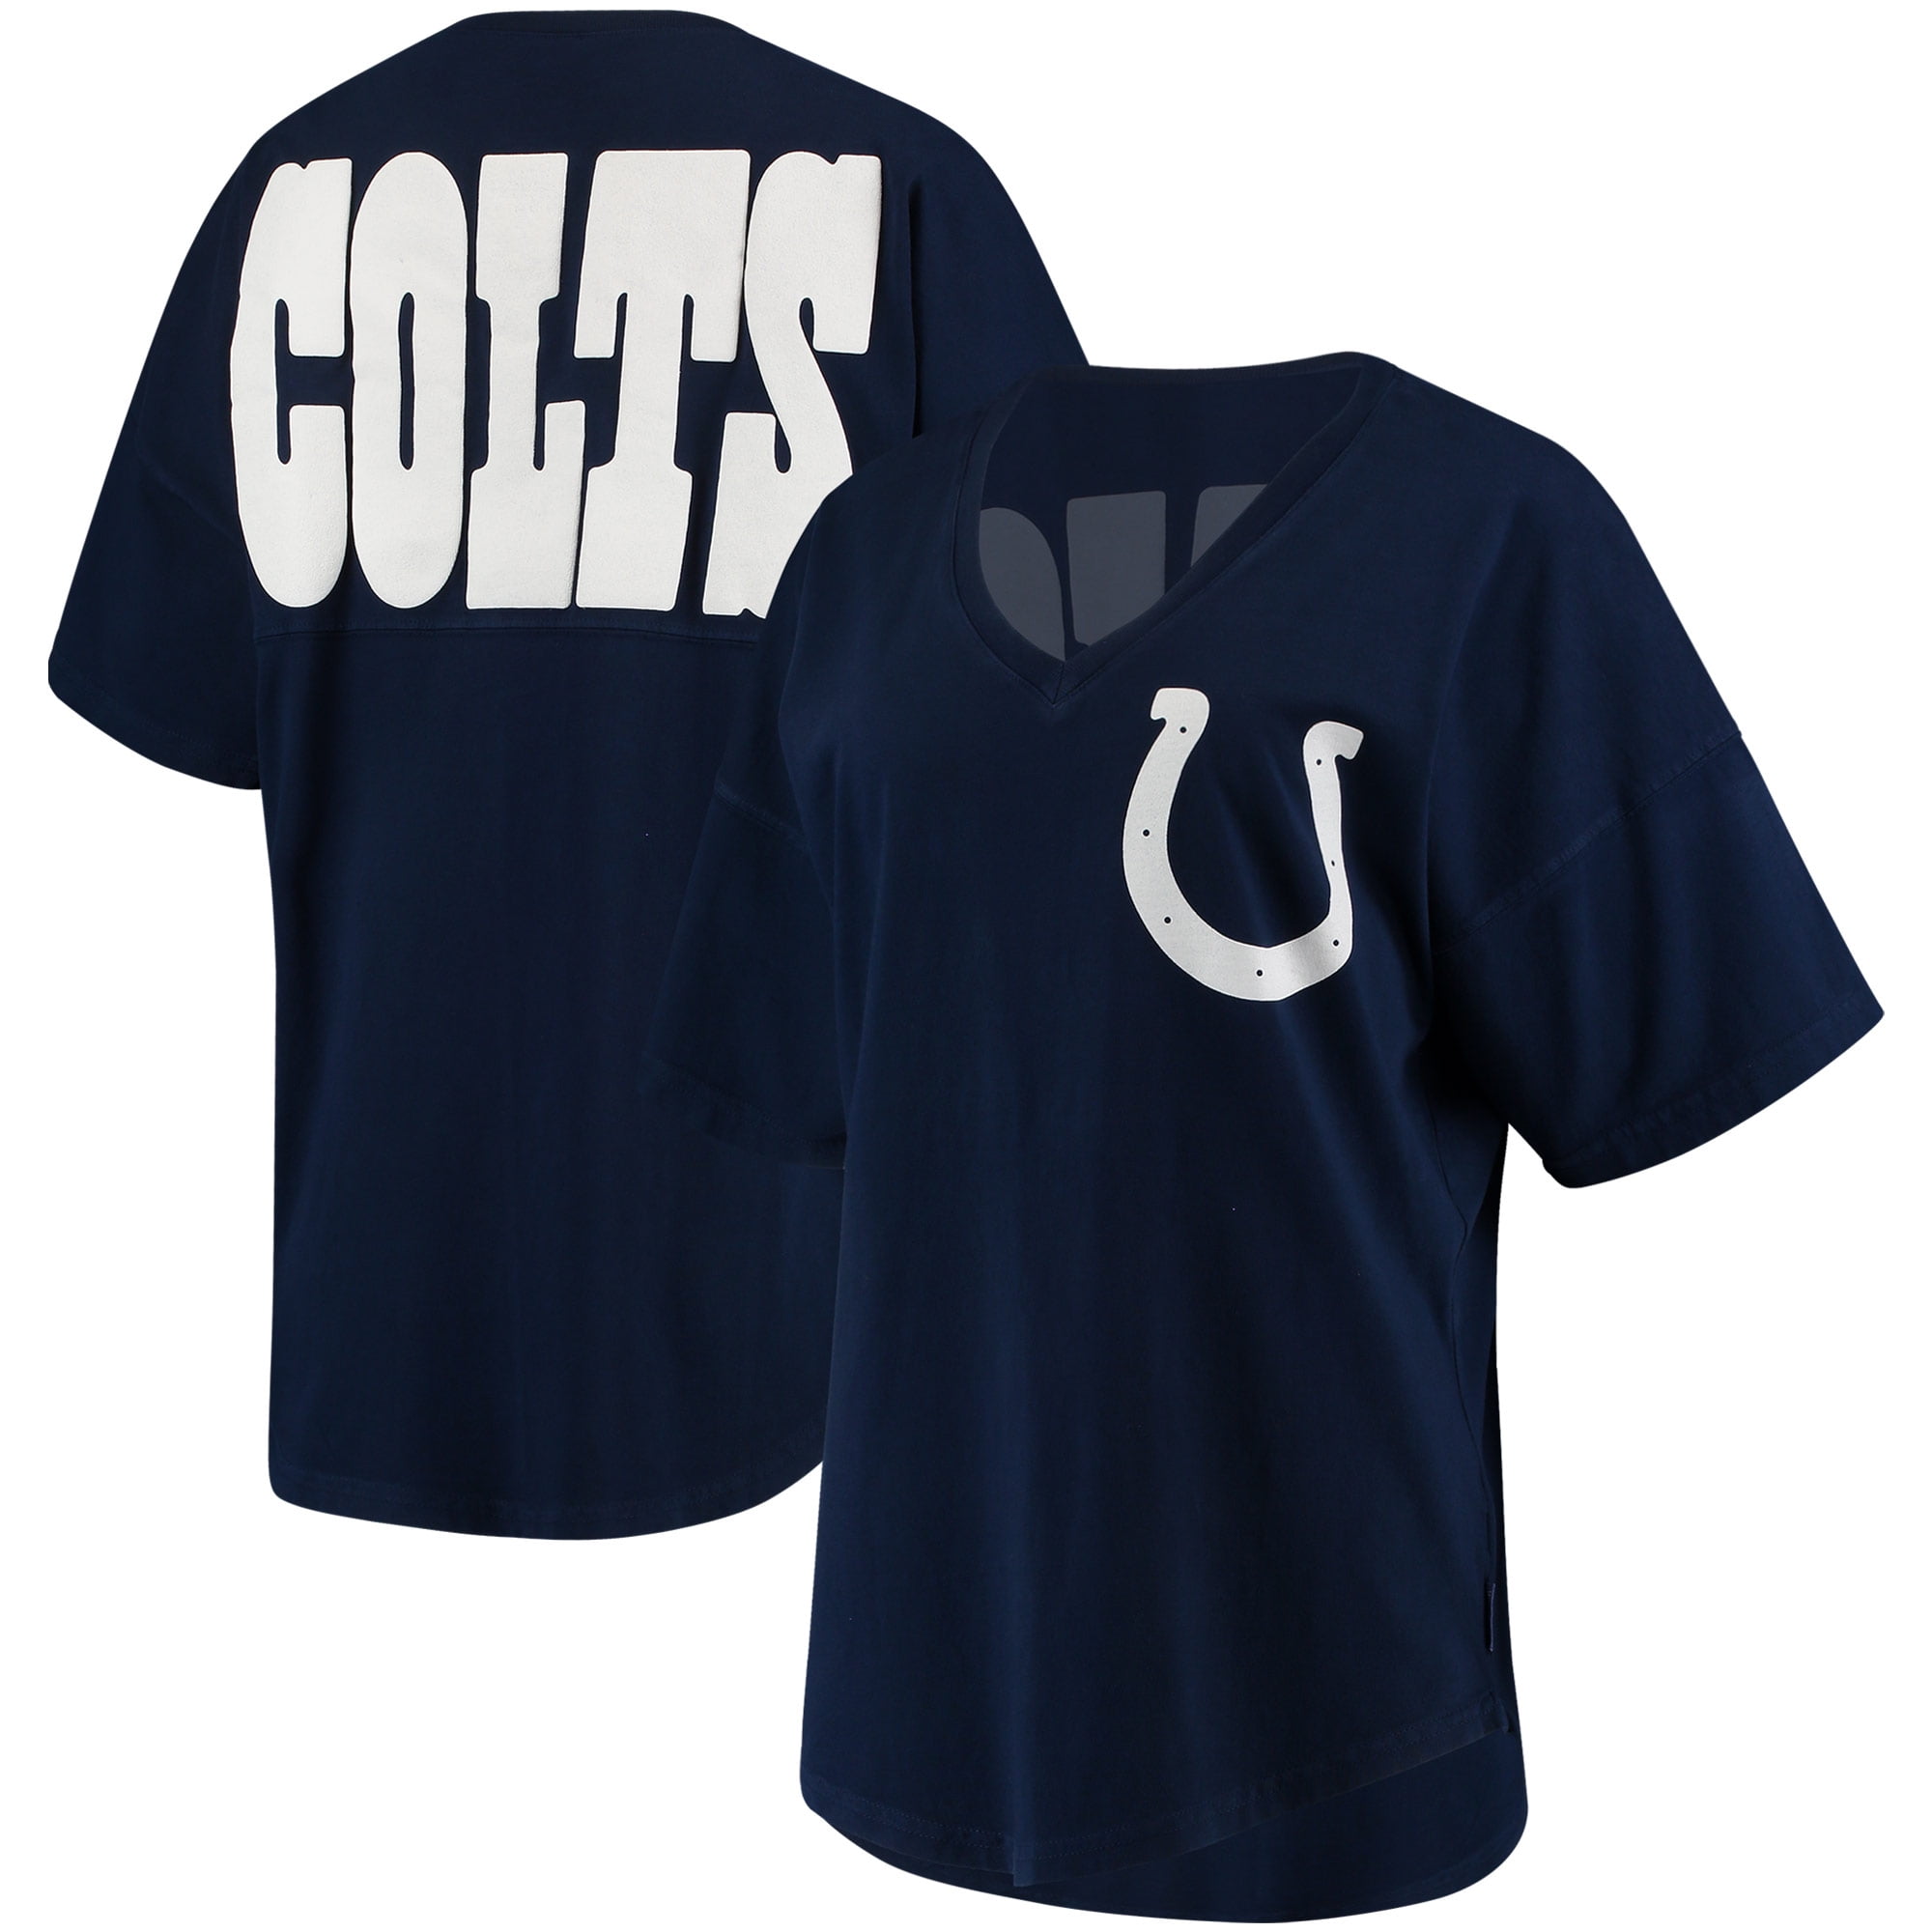 Indianapolis Colts NFL Pro Line by 